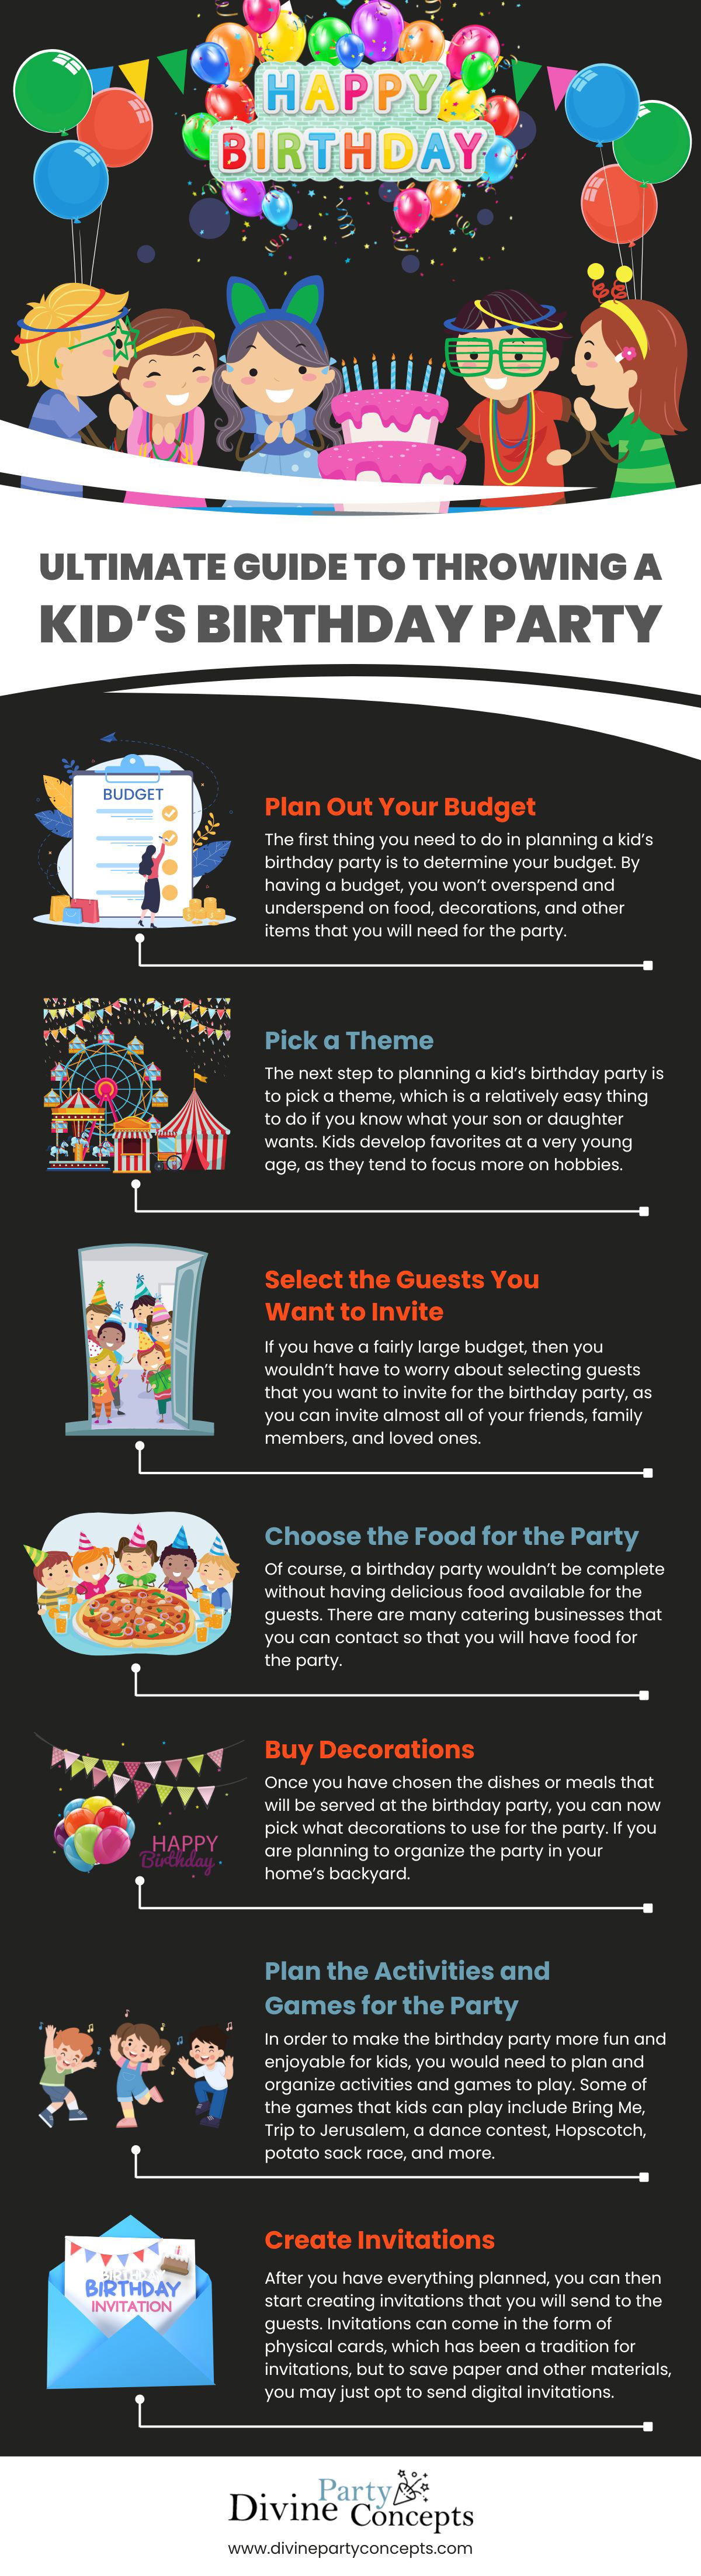 Ultimate Guide to Throwing a Kid’s Birthday Party